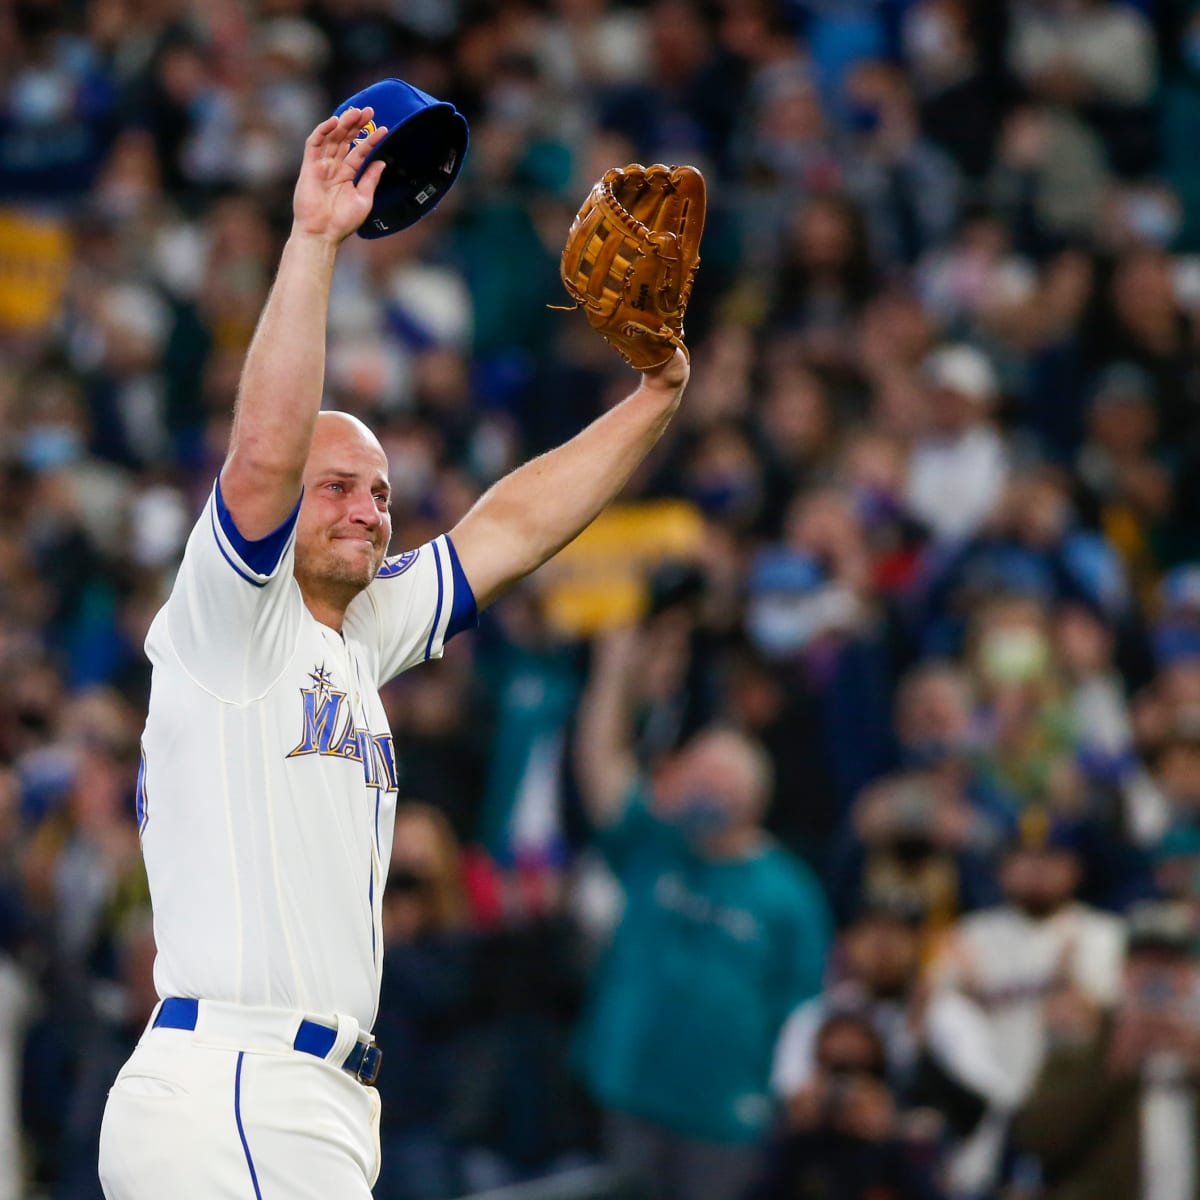 Kyle Seager retires from MLB after 11 seasons with Mariners - Seattle Sports